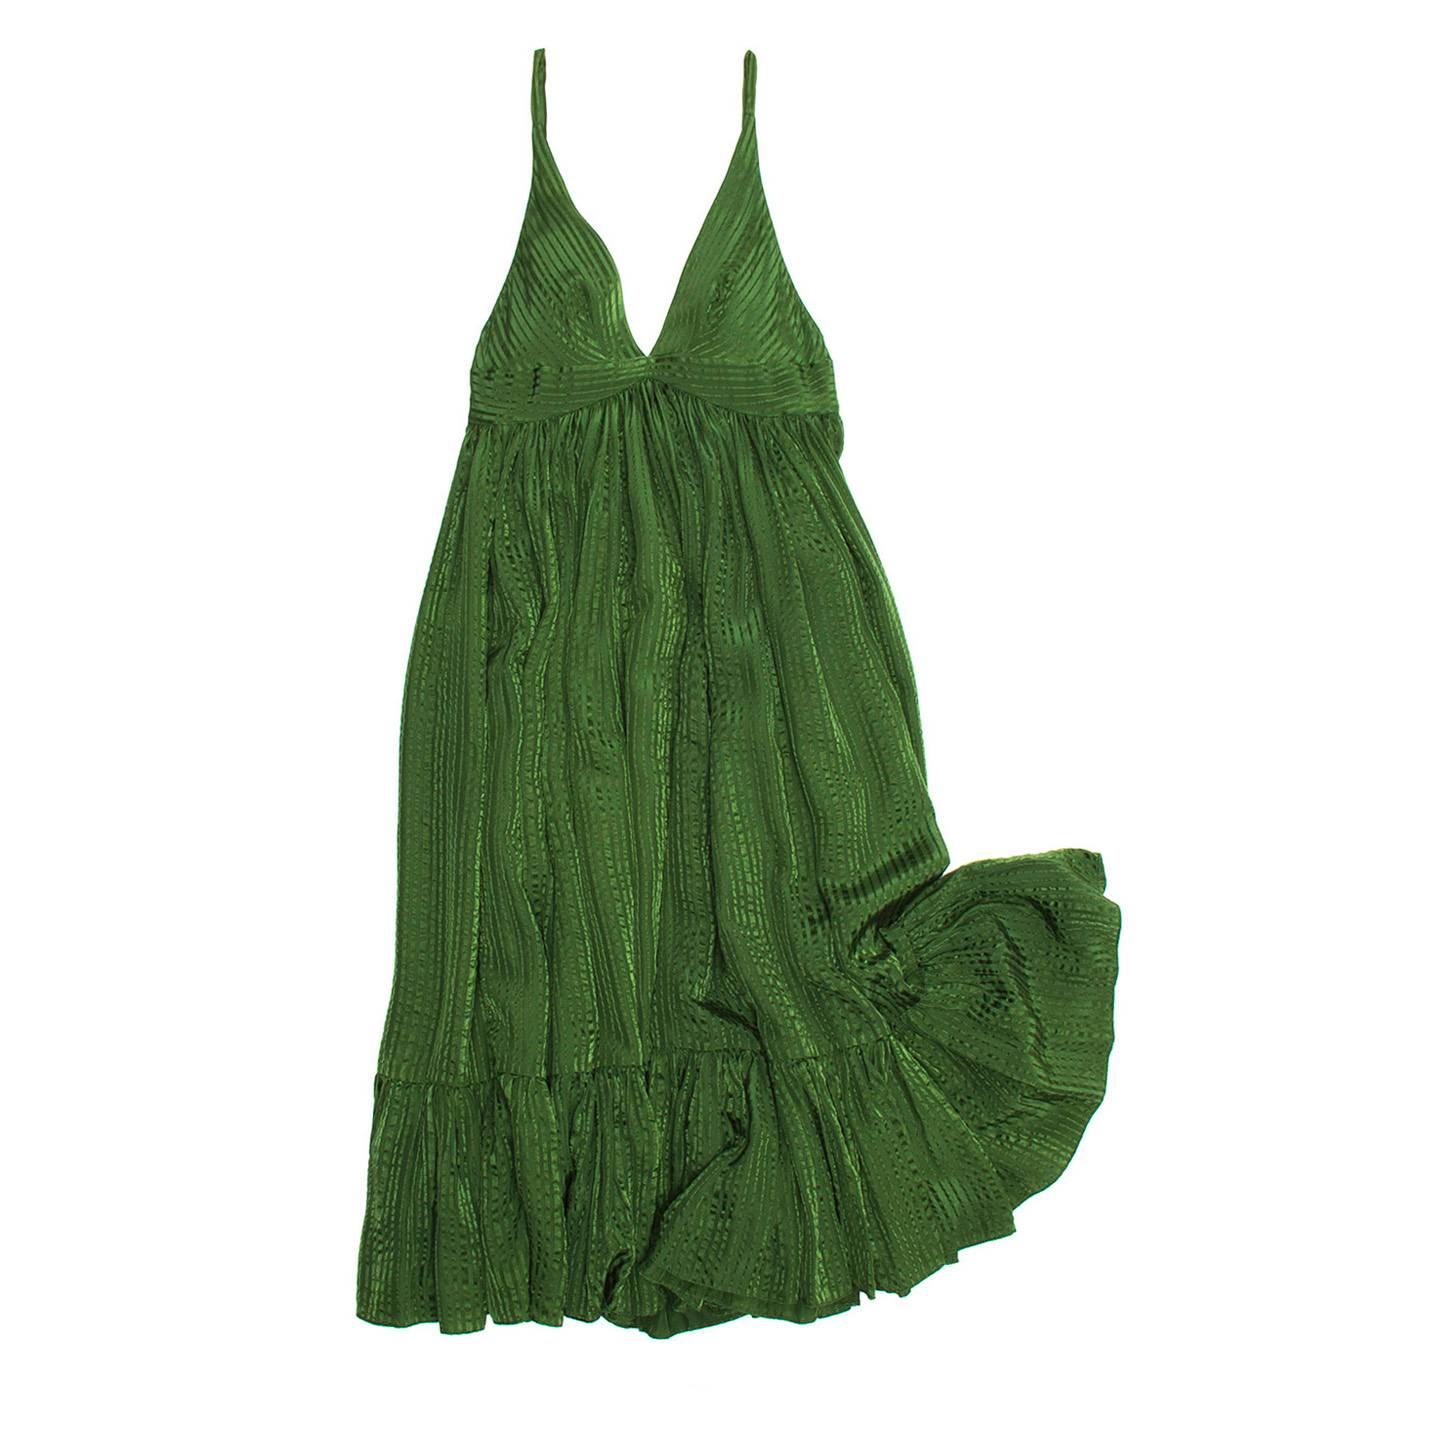 Green silk jacquard stripe hippie chic dress with thin shoulder straps and empire line. The body panel is gathered below the empire line around the body creating the volume on the skirt. The dress fit is wide, mid calf length and with a gathered